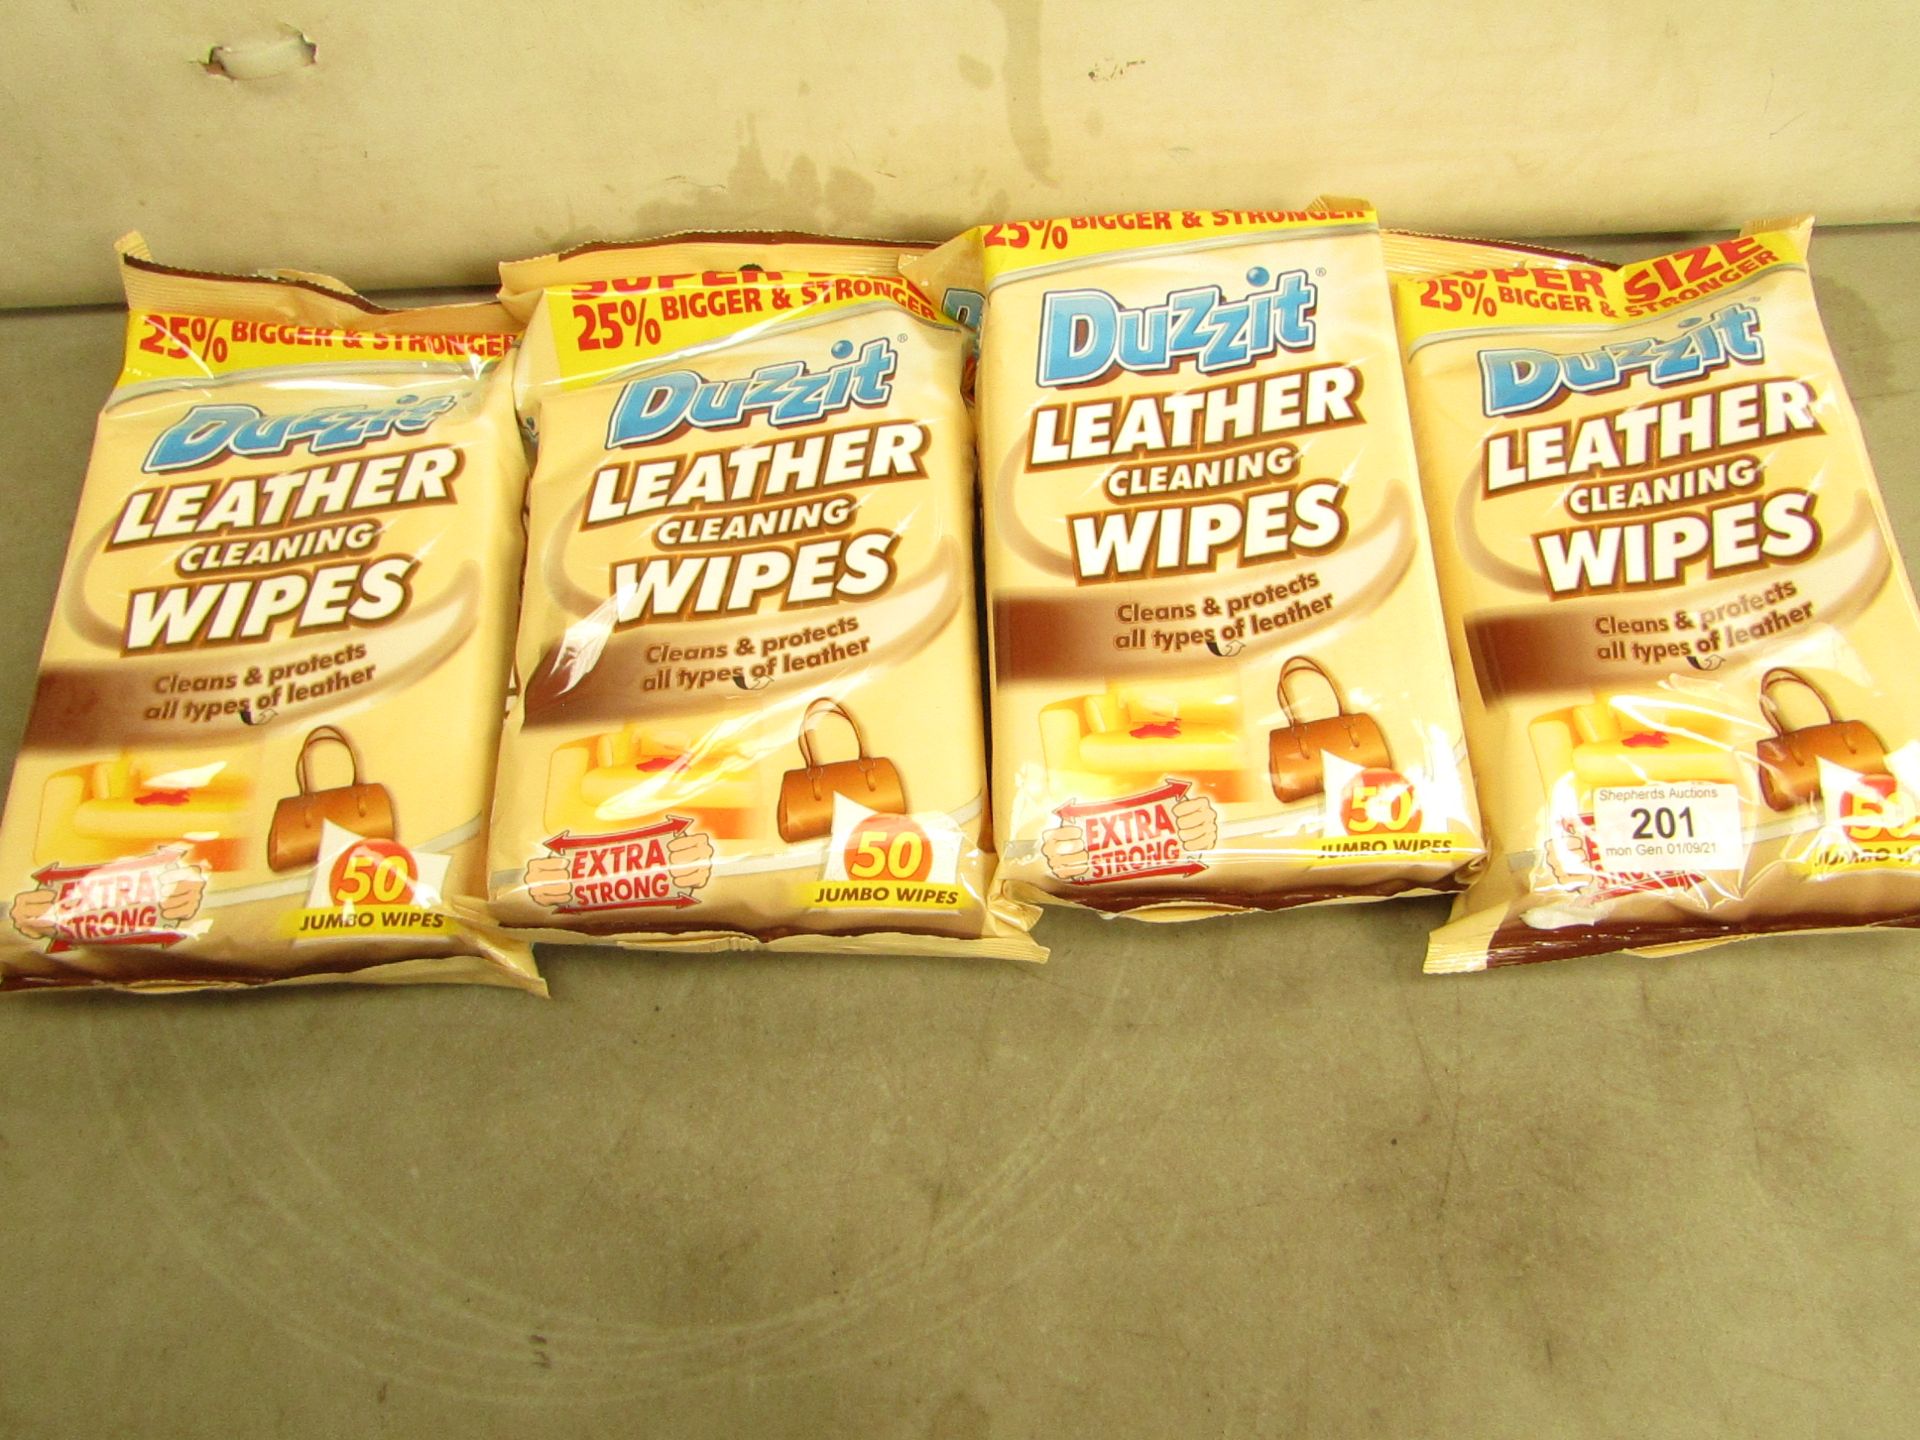 4 Packs of 50 Duzzit Leather Cleaning Wipes - New & Packaged.